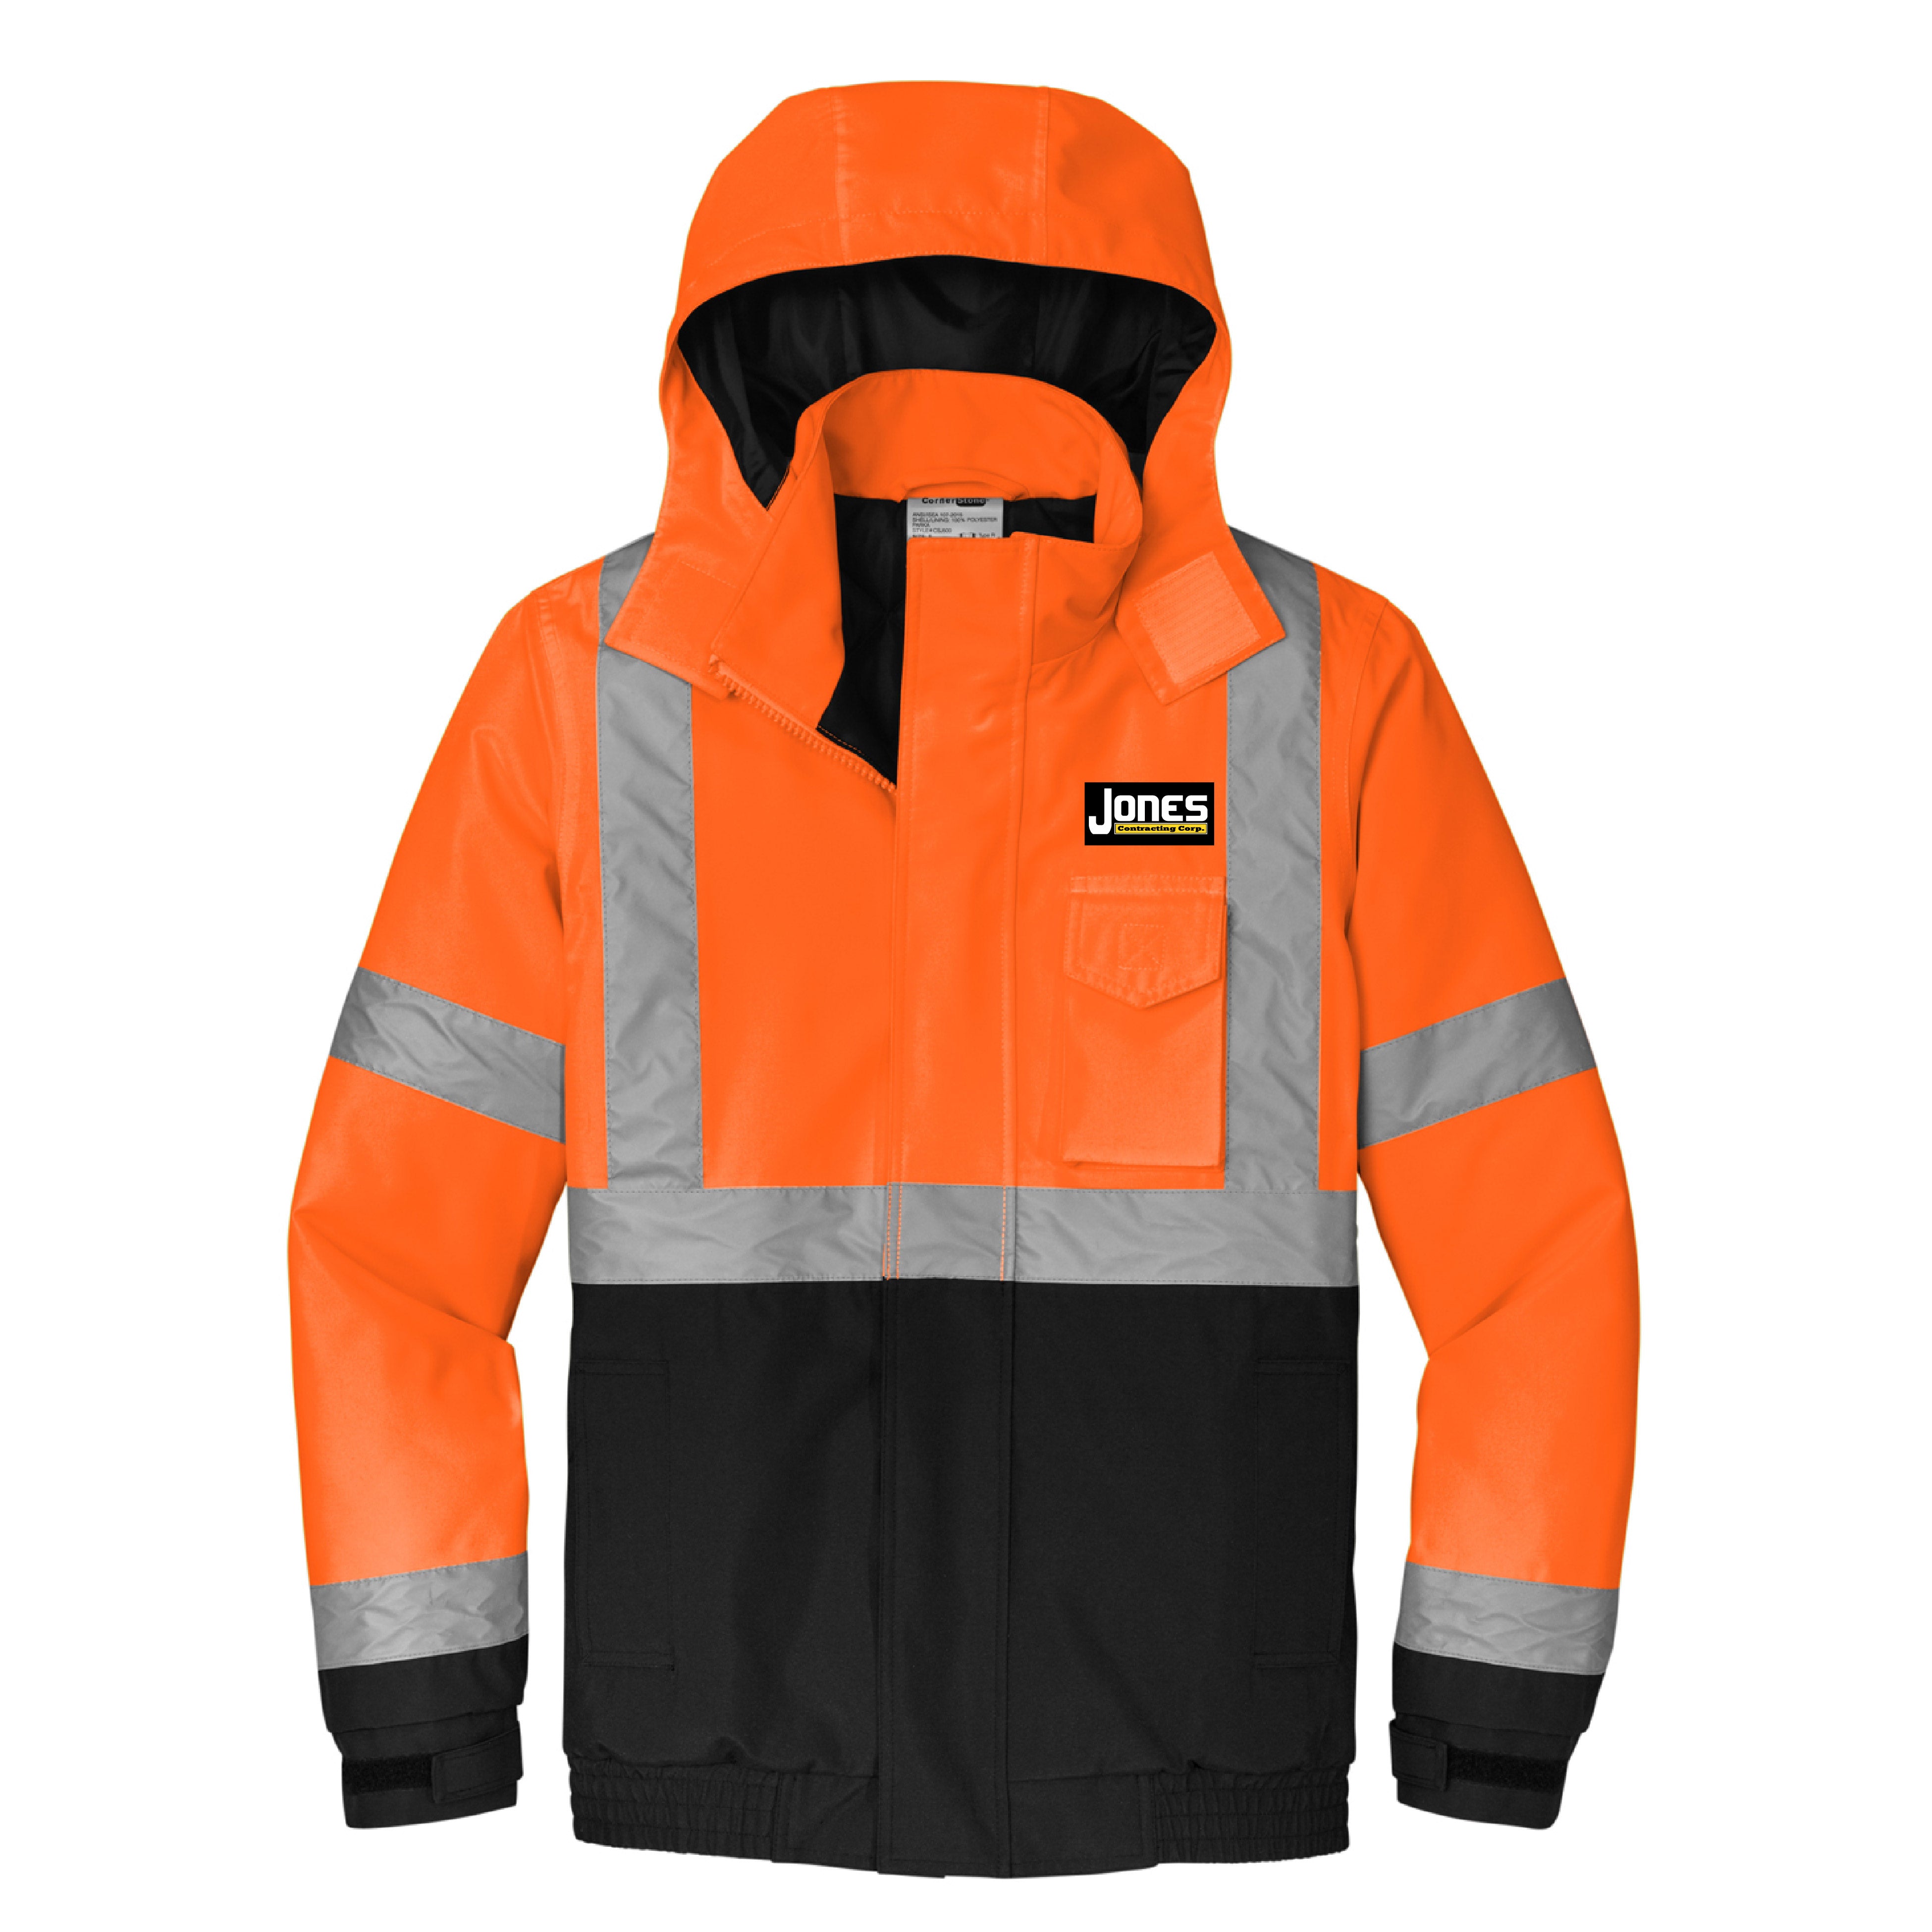 Jones Contracting ANSI 107 Class 3 Insulated Bomber Jacket